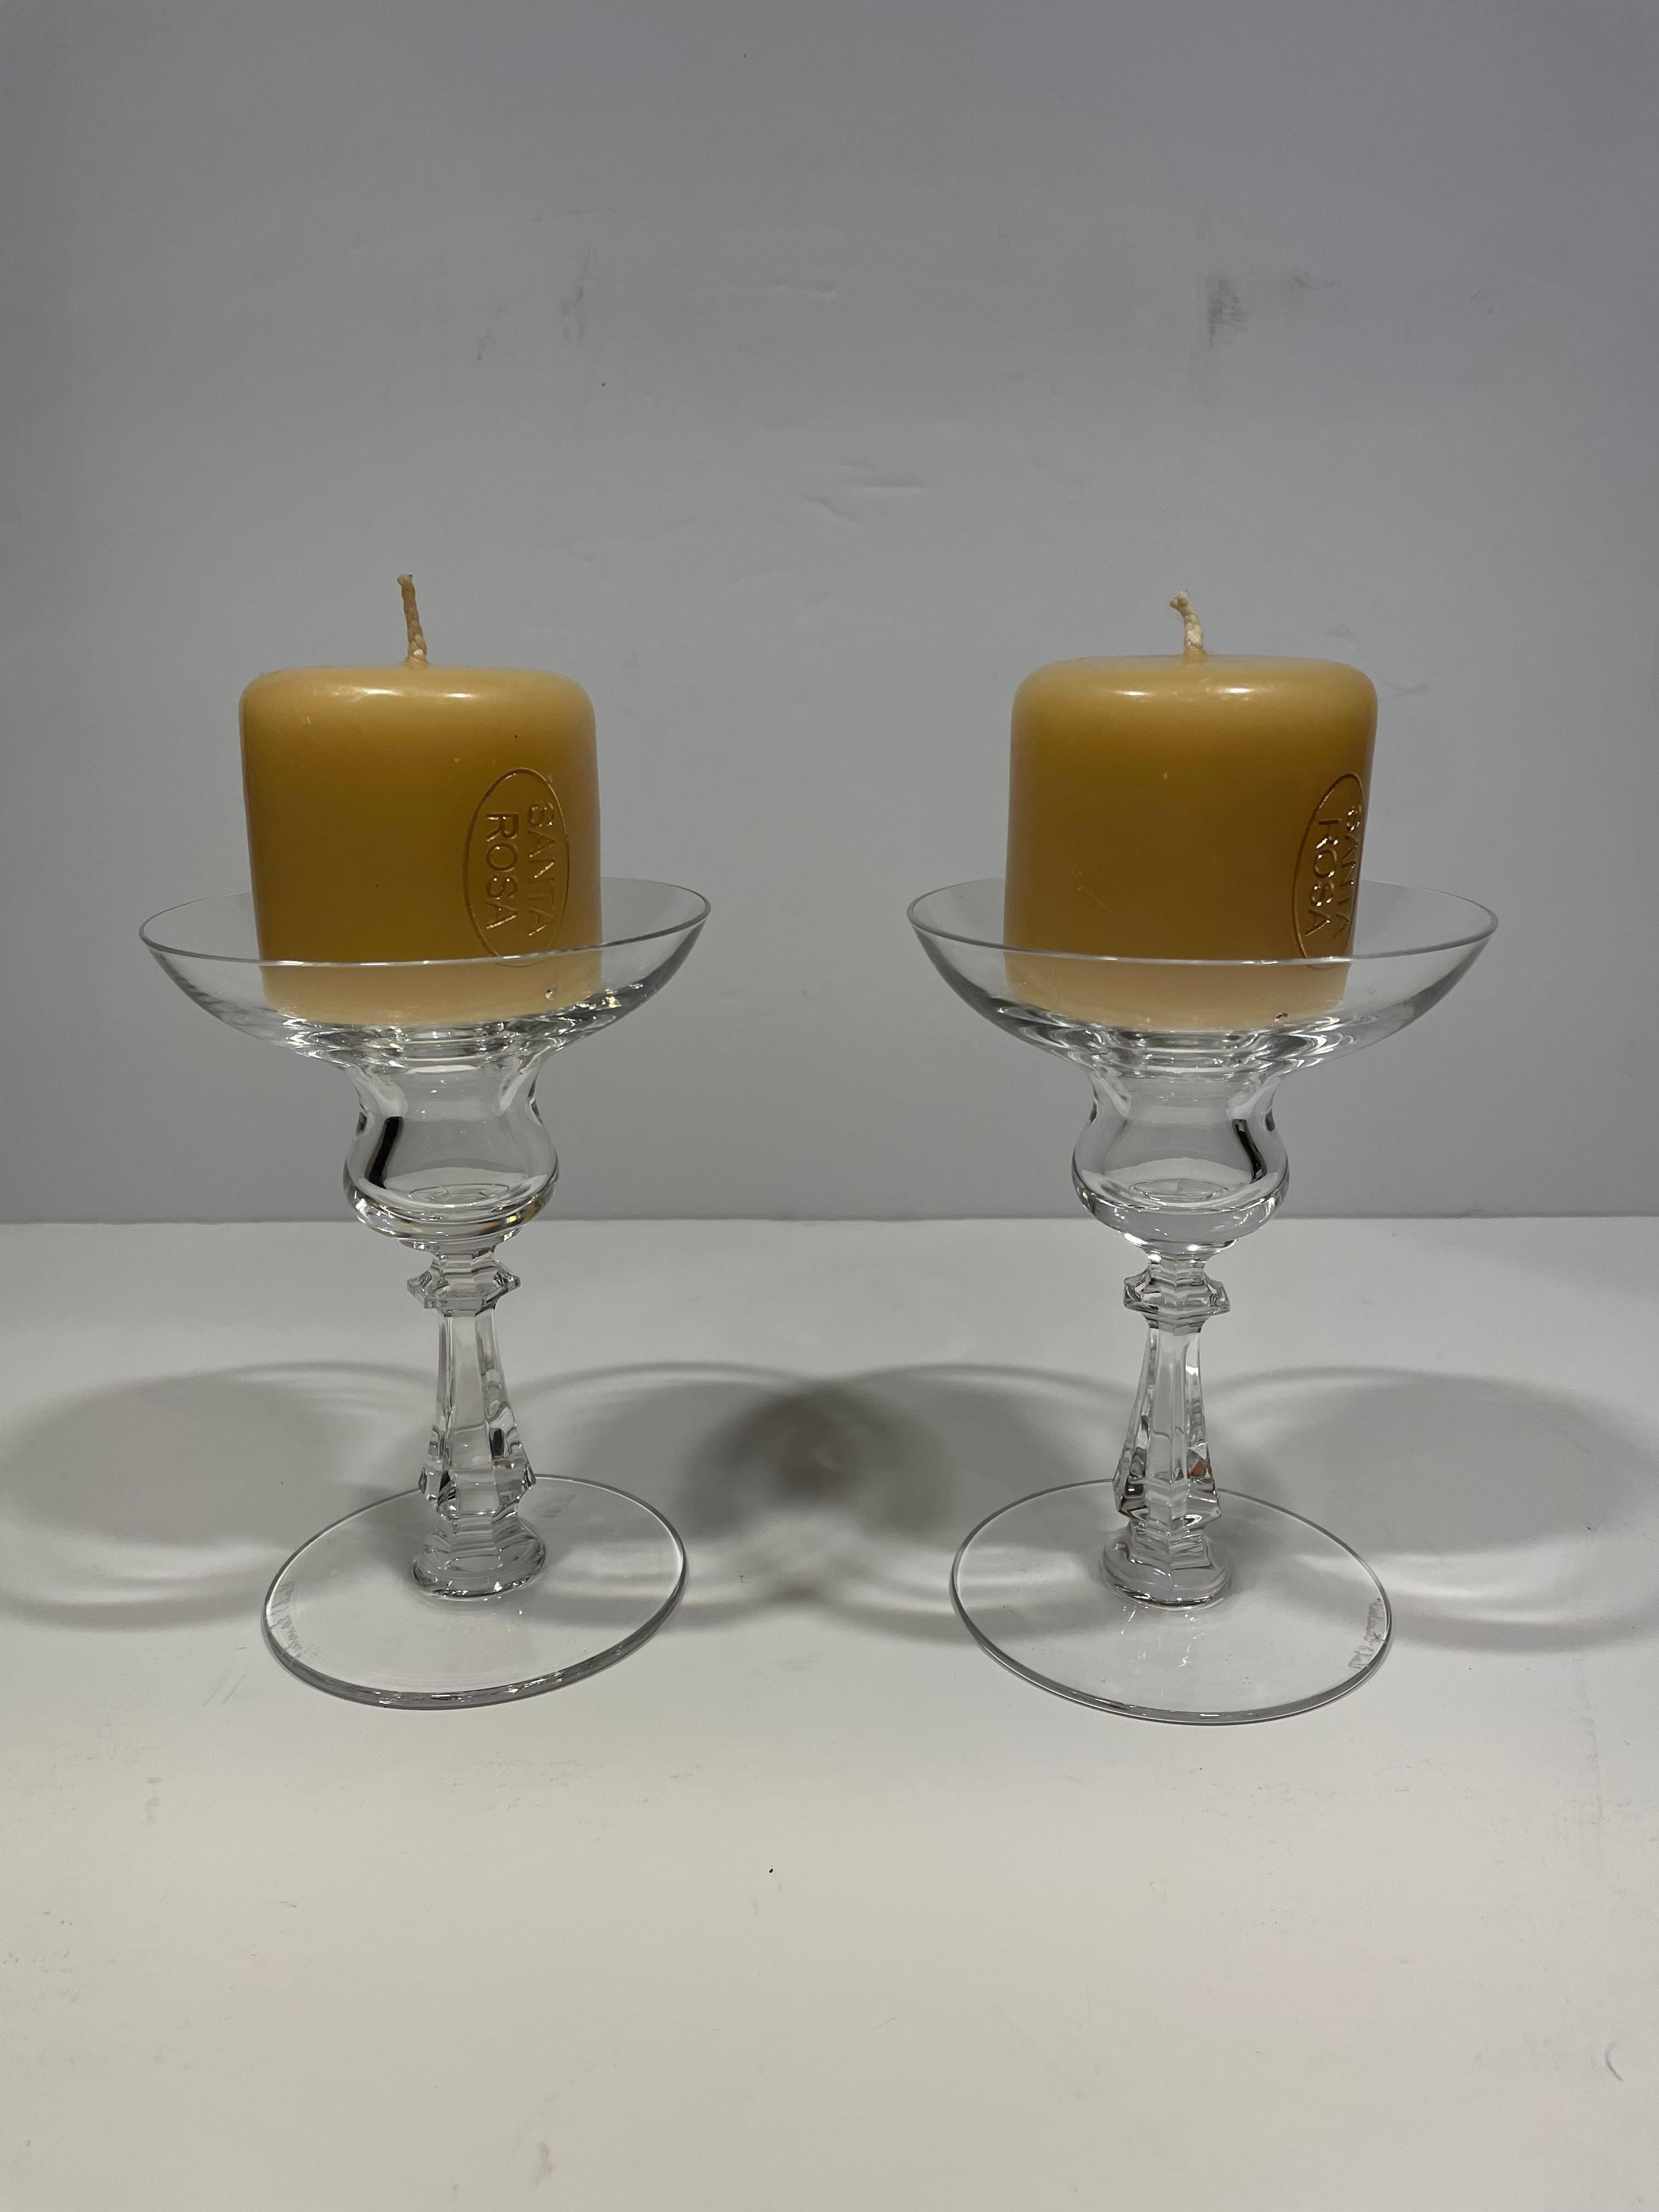 This pair of Val St. Lambert crystal candlesticks was designed for Tiffany and Co. They date to the 1950s, and are in impeccable shape! pictured here with smaller stout candles, they can hold much larger and taller candles as well. I'd say up to a